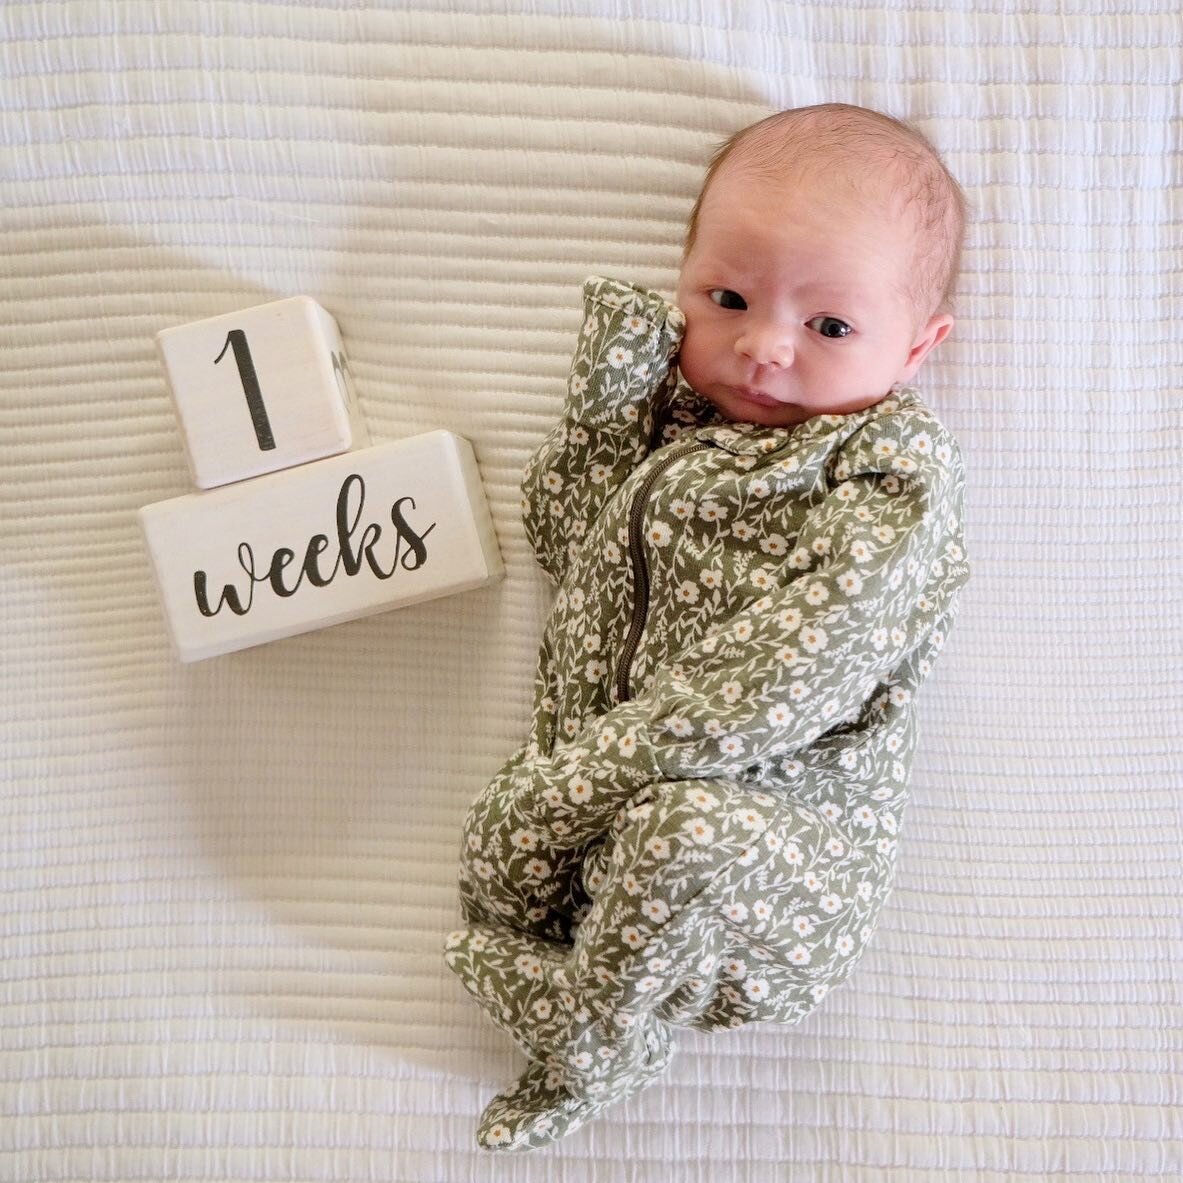 After 41 weeks + 1 day, Sloane Charlotte Youngblade finally made her debut on November 5th. In a move that I very much relate to, she decided to get the job done right before the deadline of a scheduled induction the next morning. Bryce is already ac